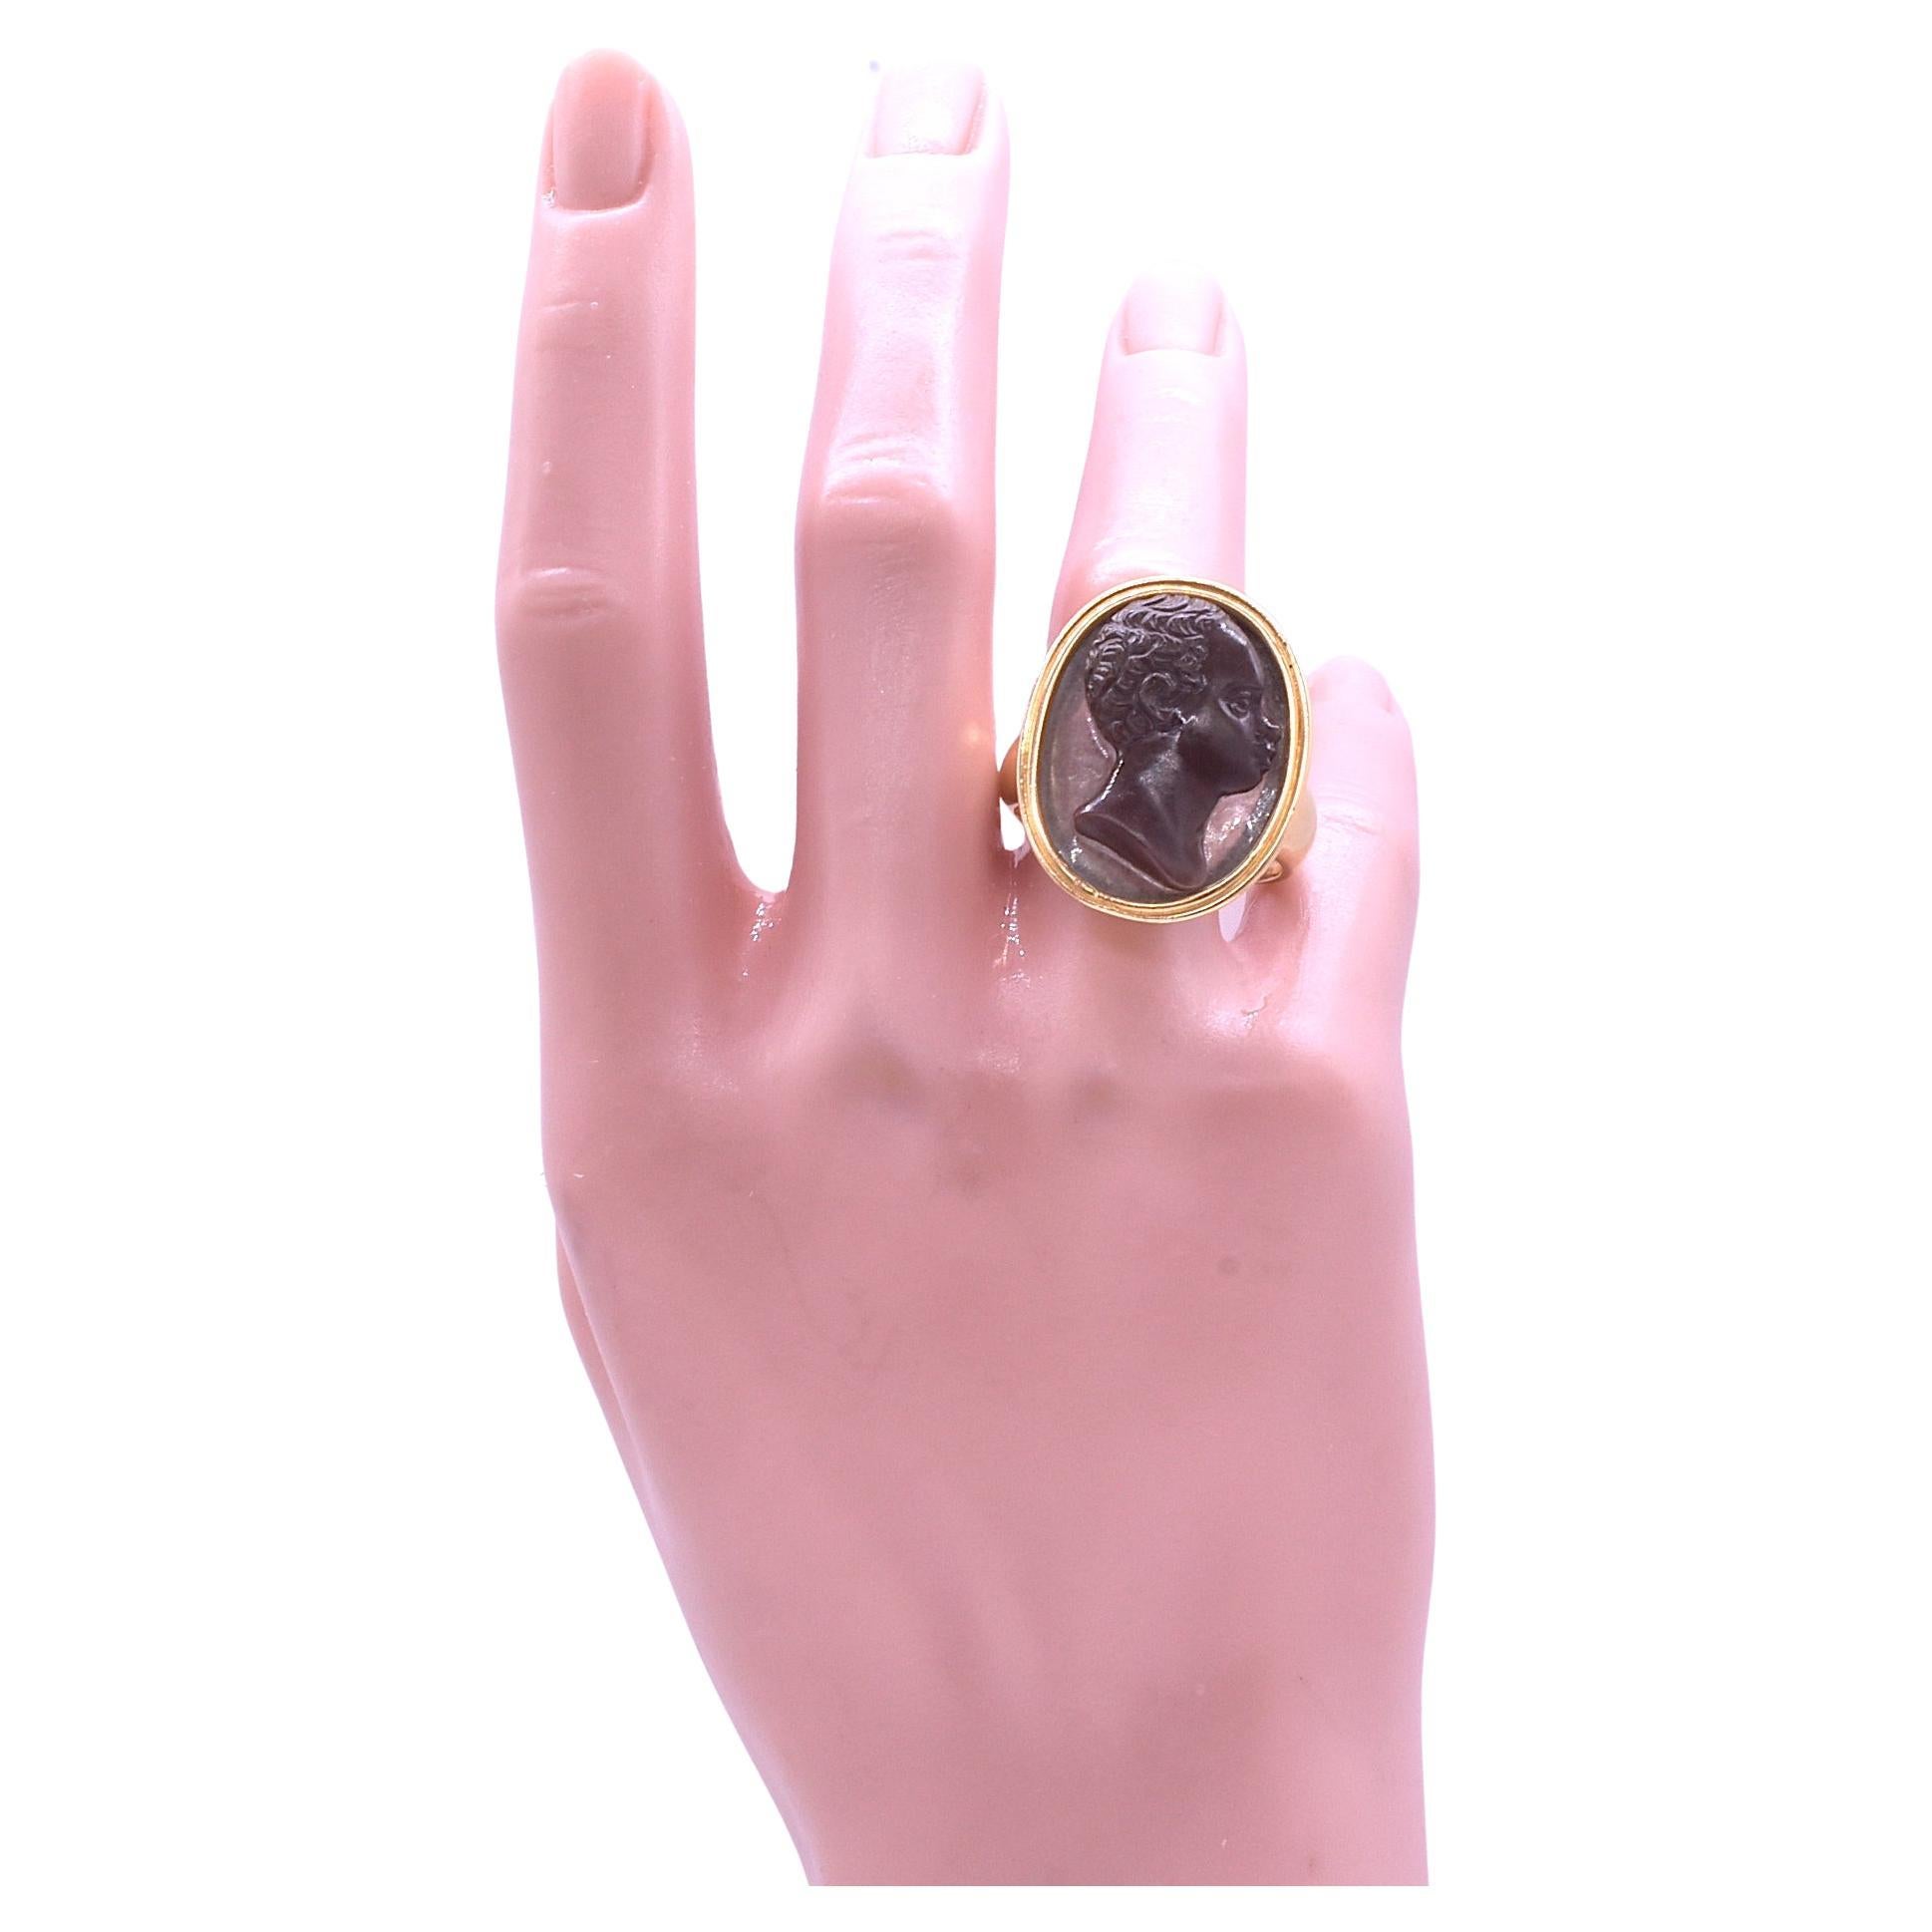 This is a spectacular, one of a kind,  cameo portrait signet ring collector's item made of sardonyx, a variety of banded onyx and a form of chalcedony quartz of reddish brown. Portrait cameos were often commissioned by those who had amassed enough